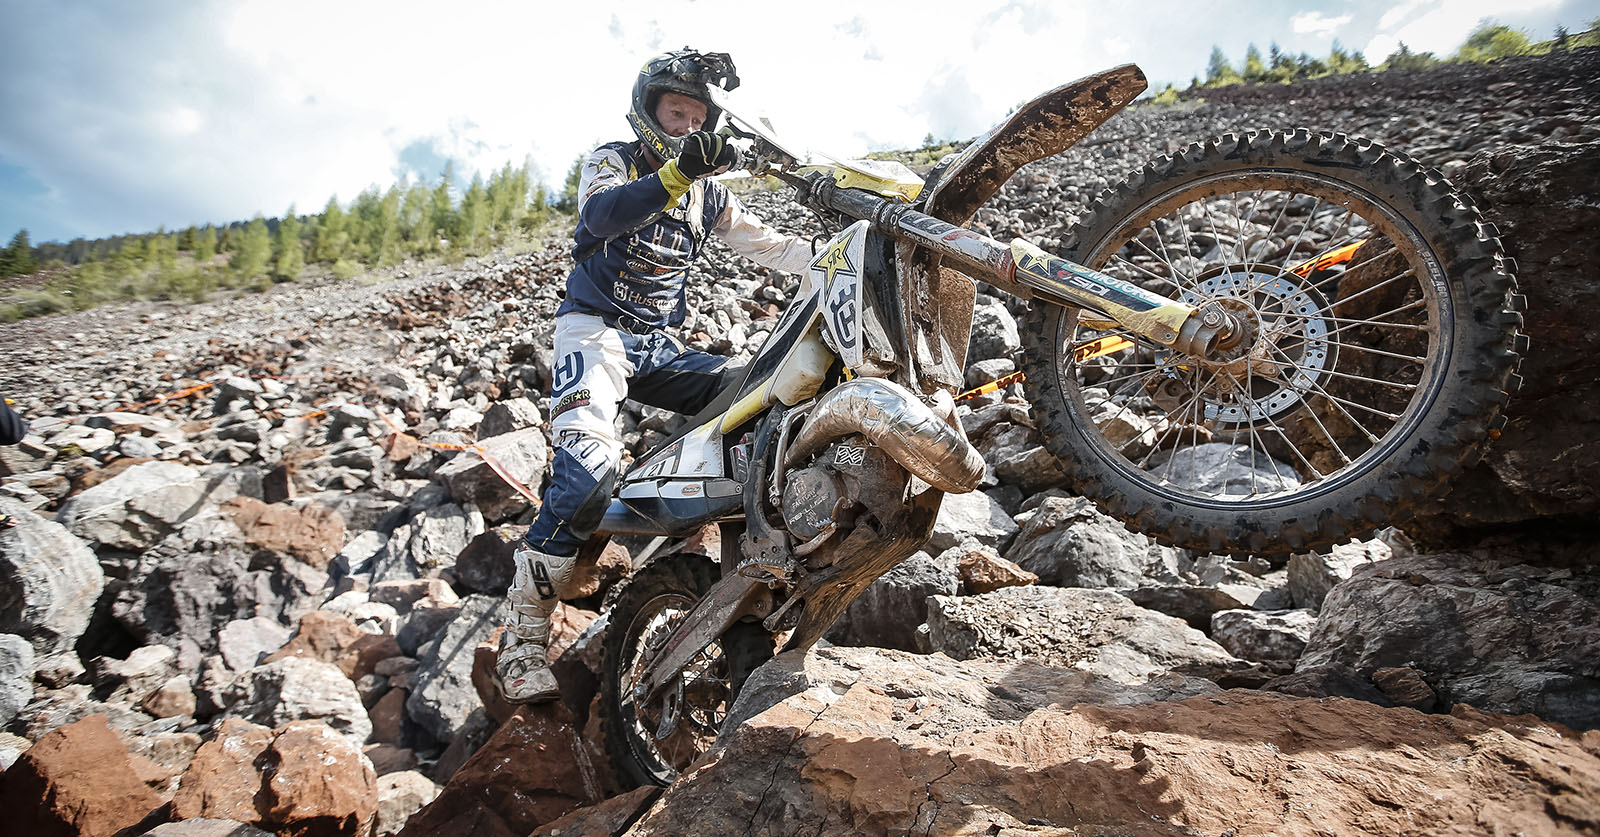 Are the FIM and WESS about to create a Hard Enduro World Championship?